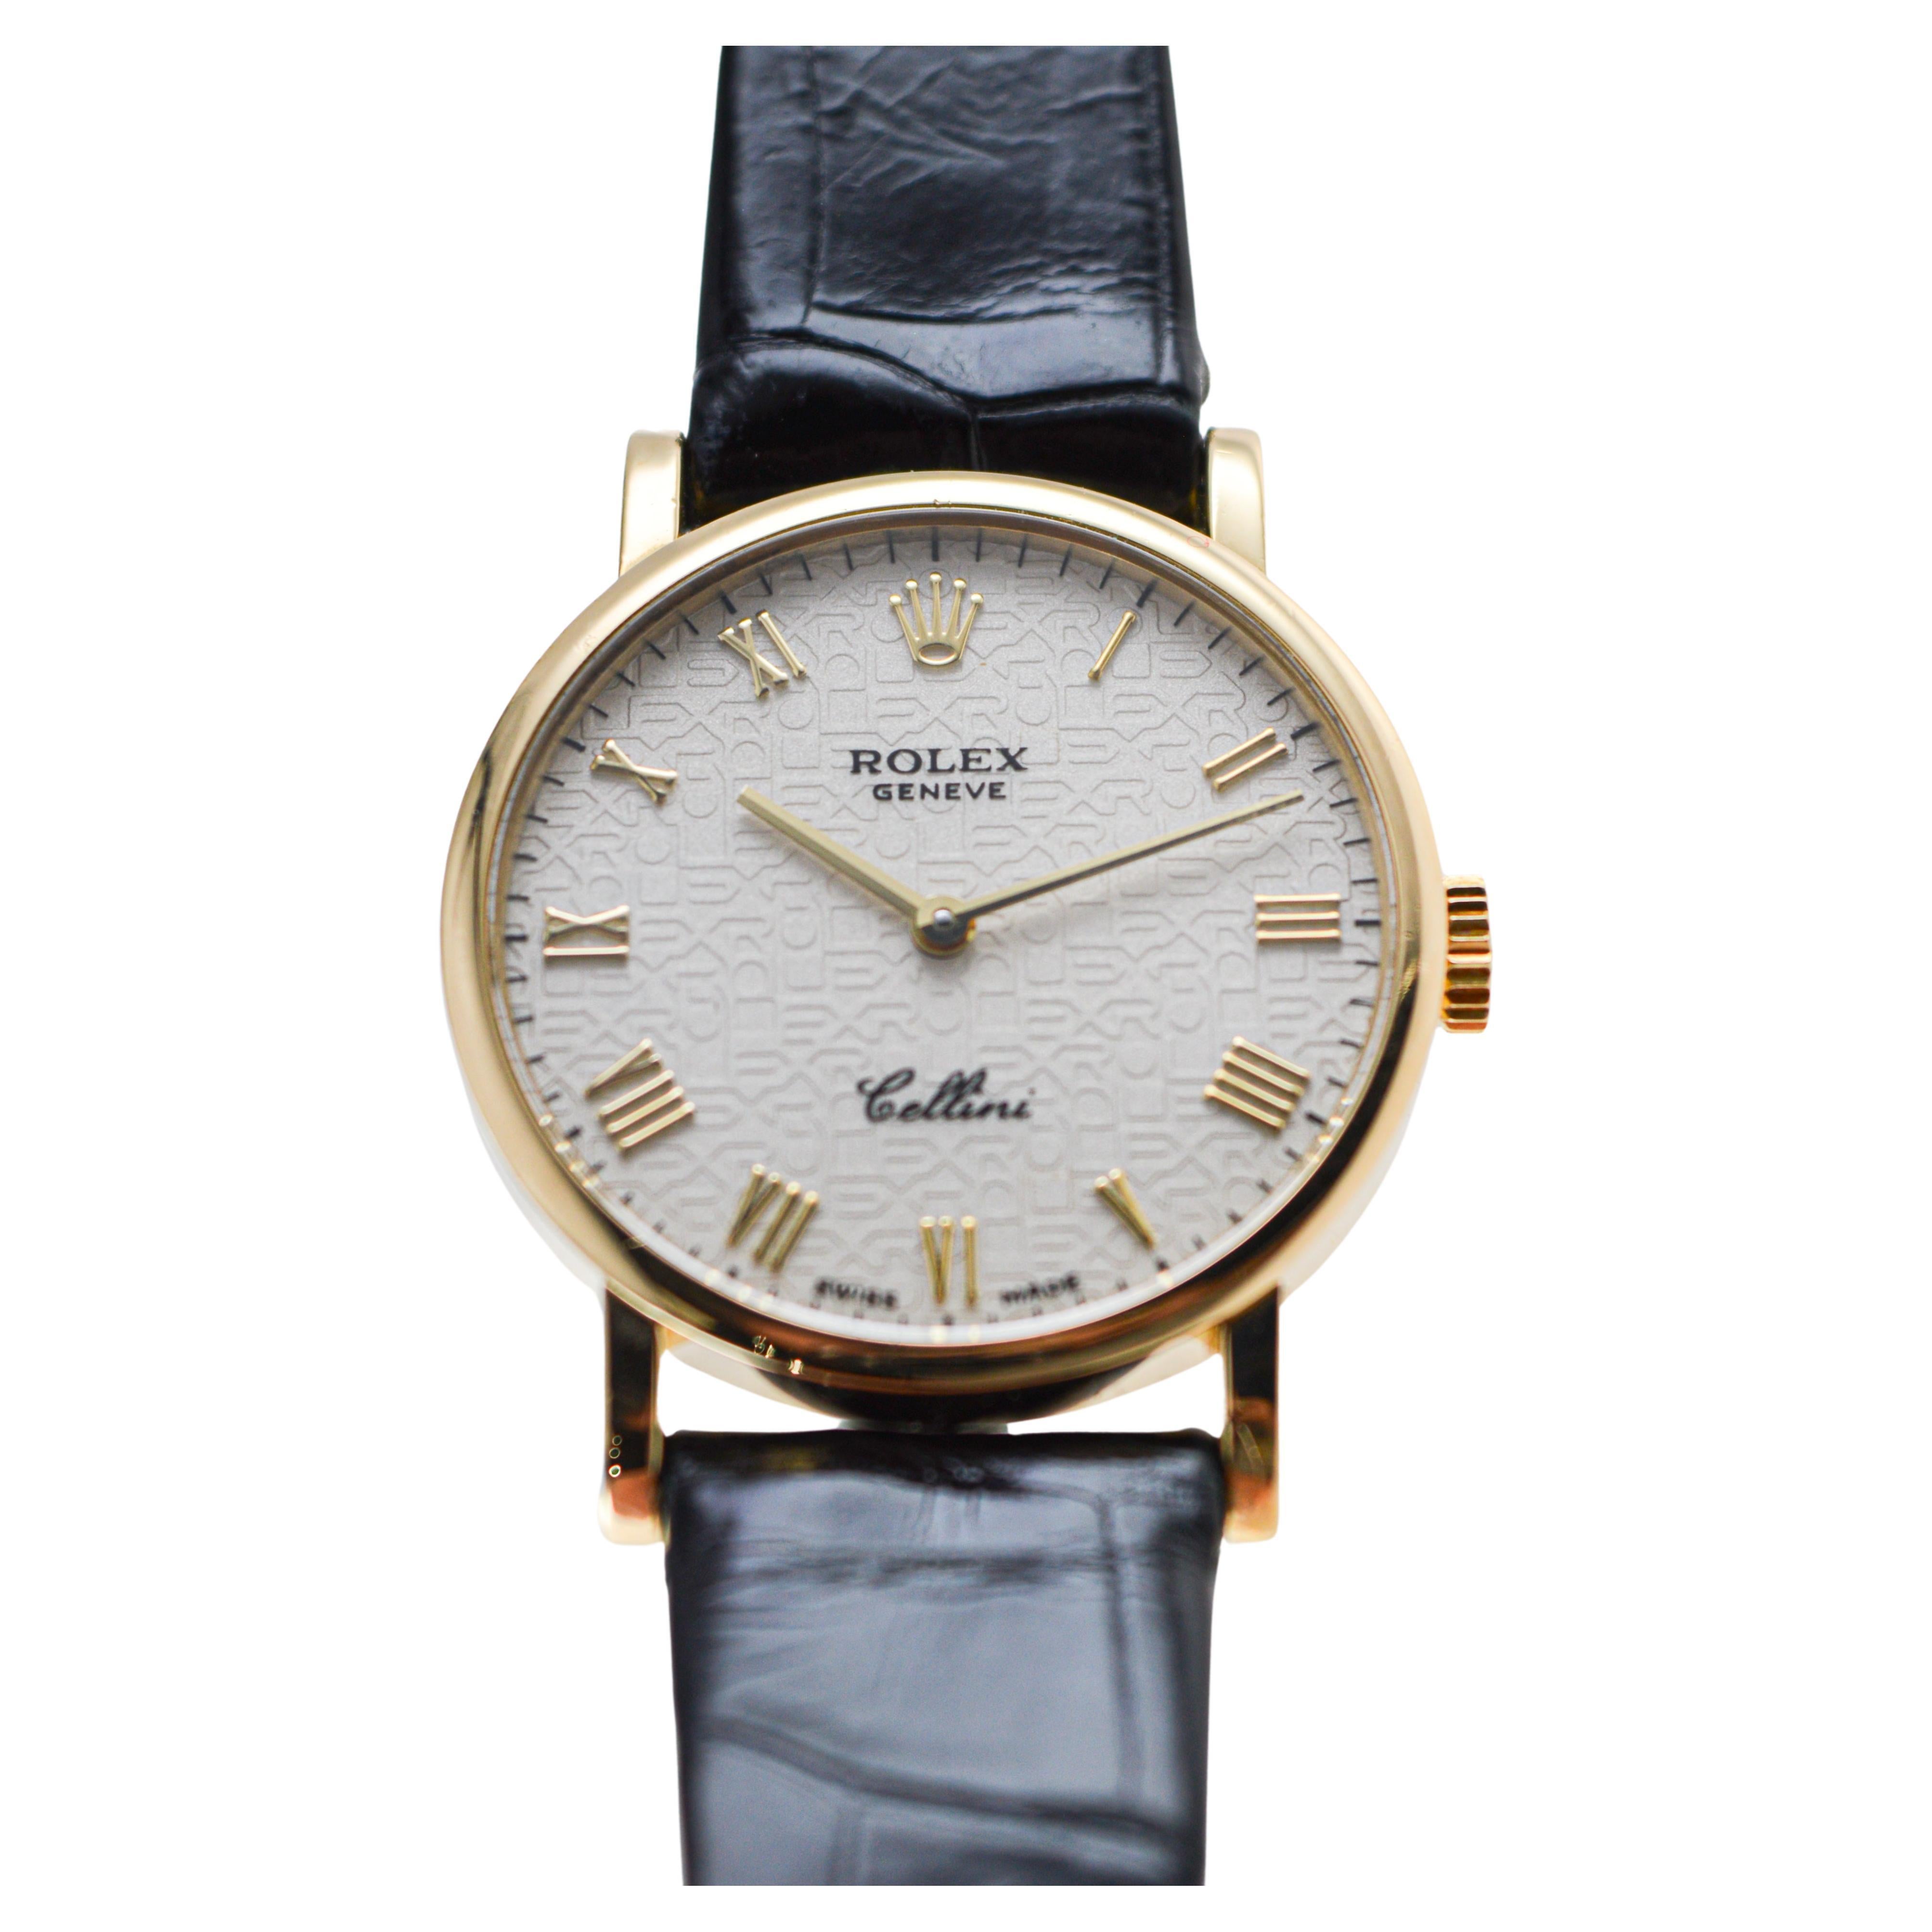  Rolex Cellini 18Kt. Solid Gold Ladies Watch with Original Strap and Buckle  2